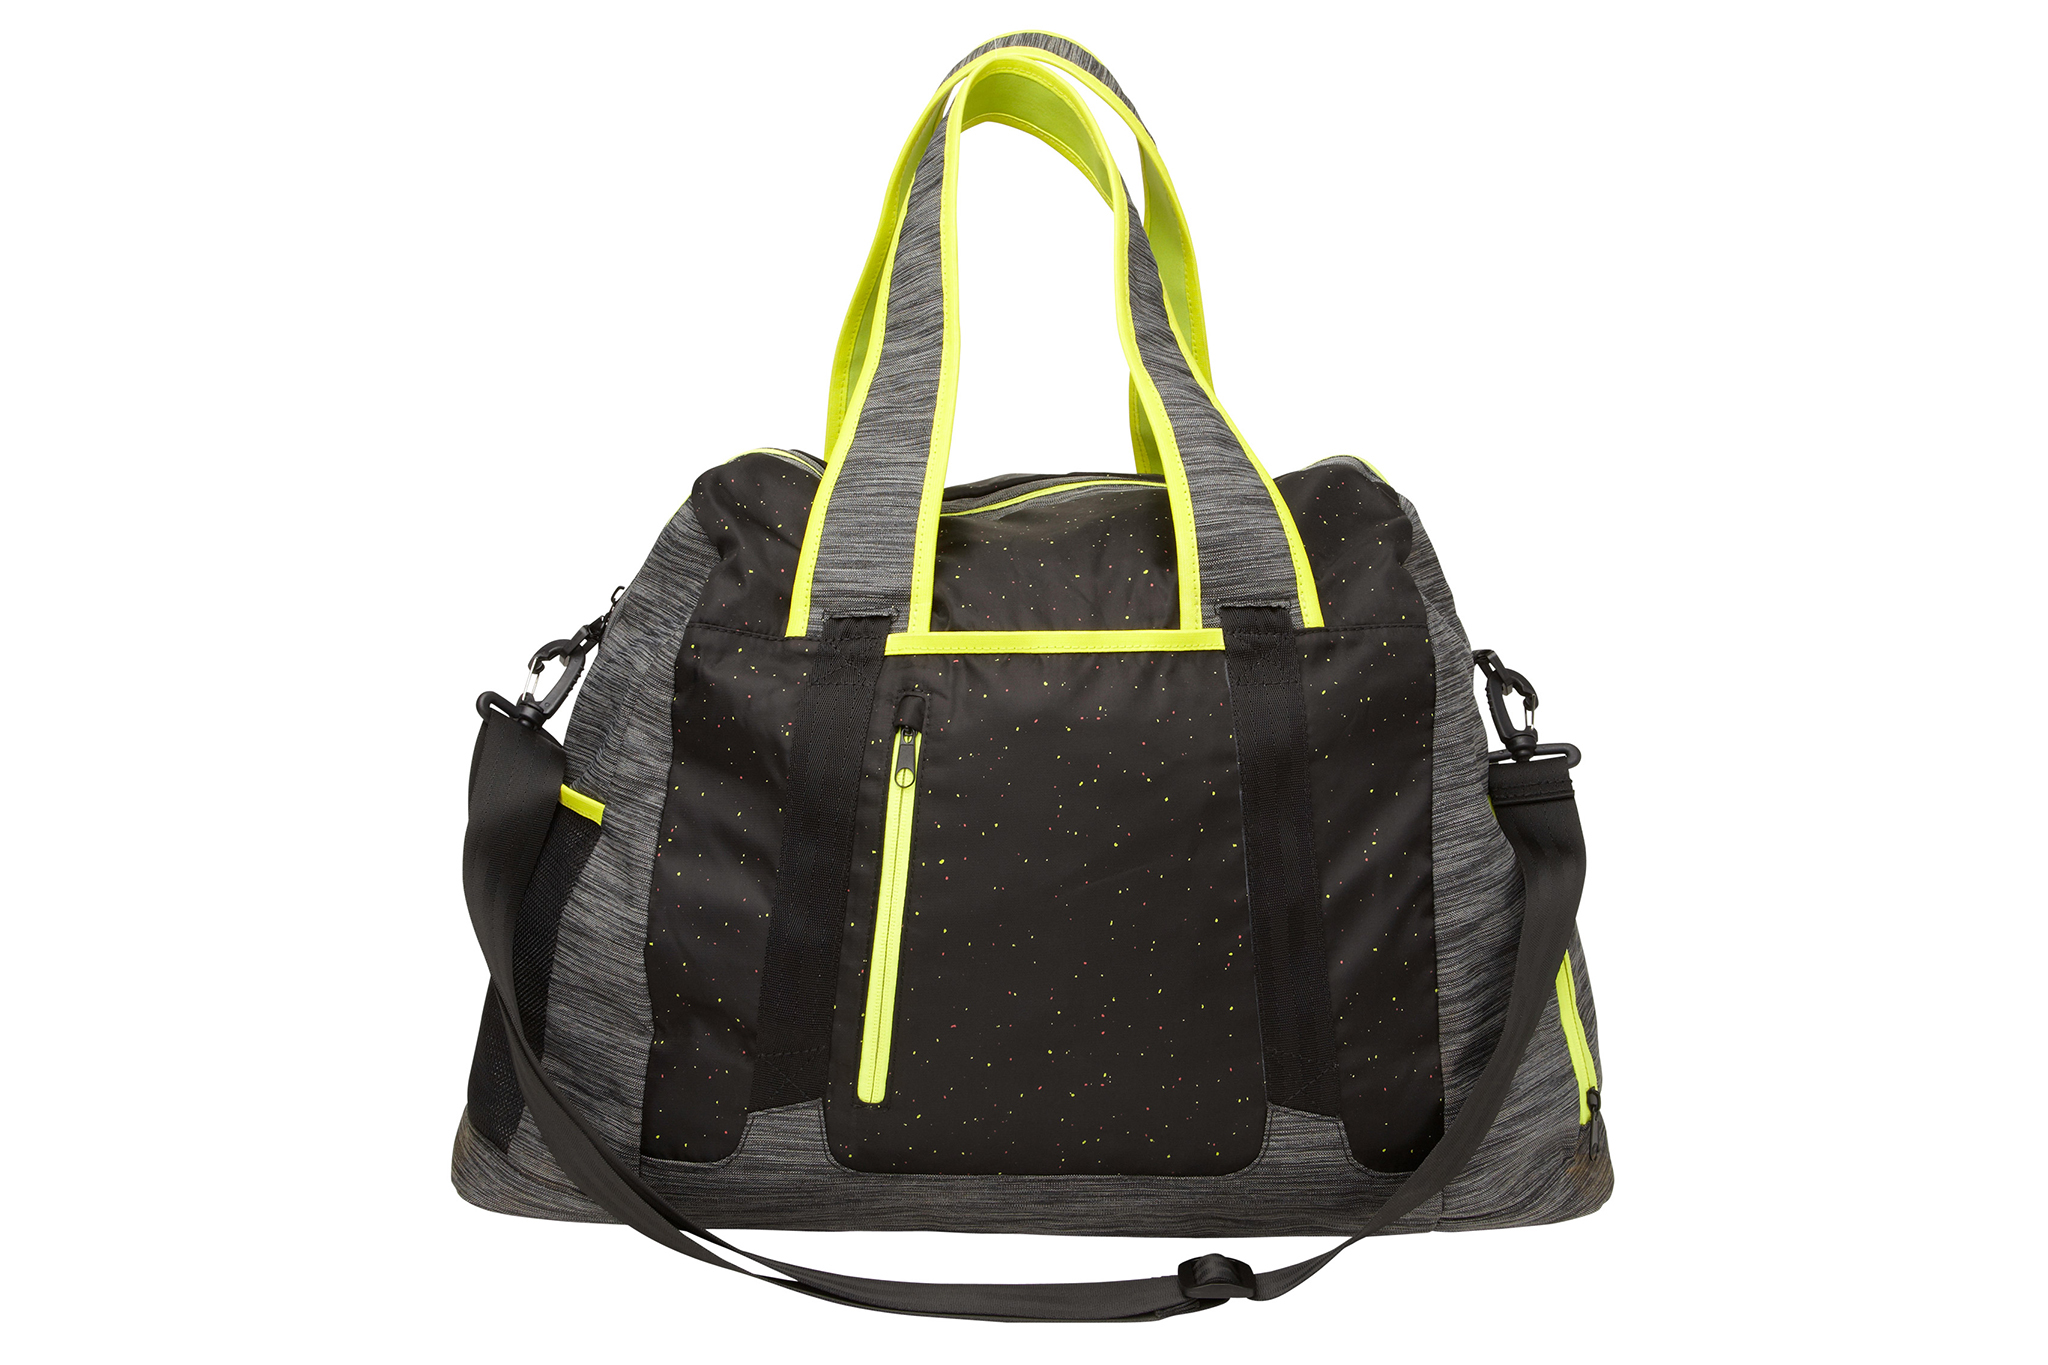 Trend watch: Stylish gym bags for men and women